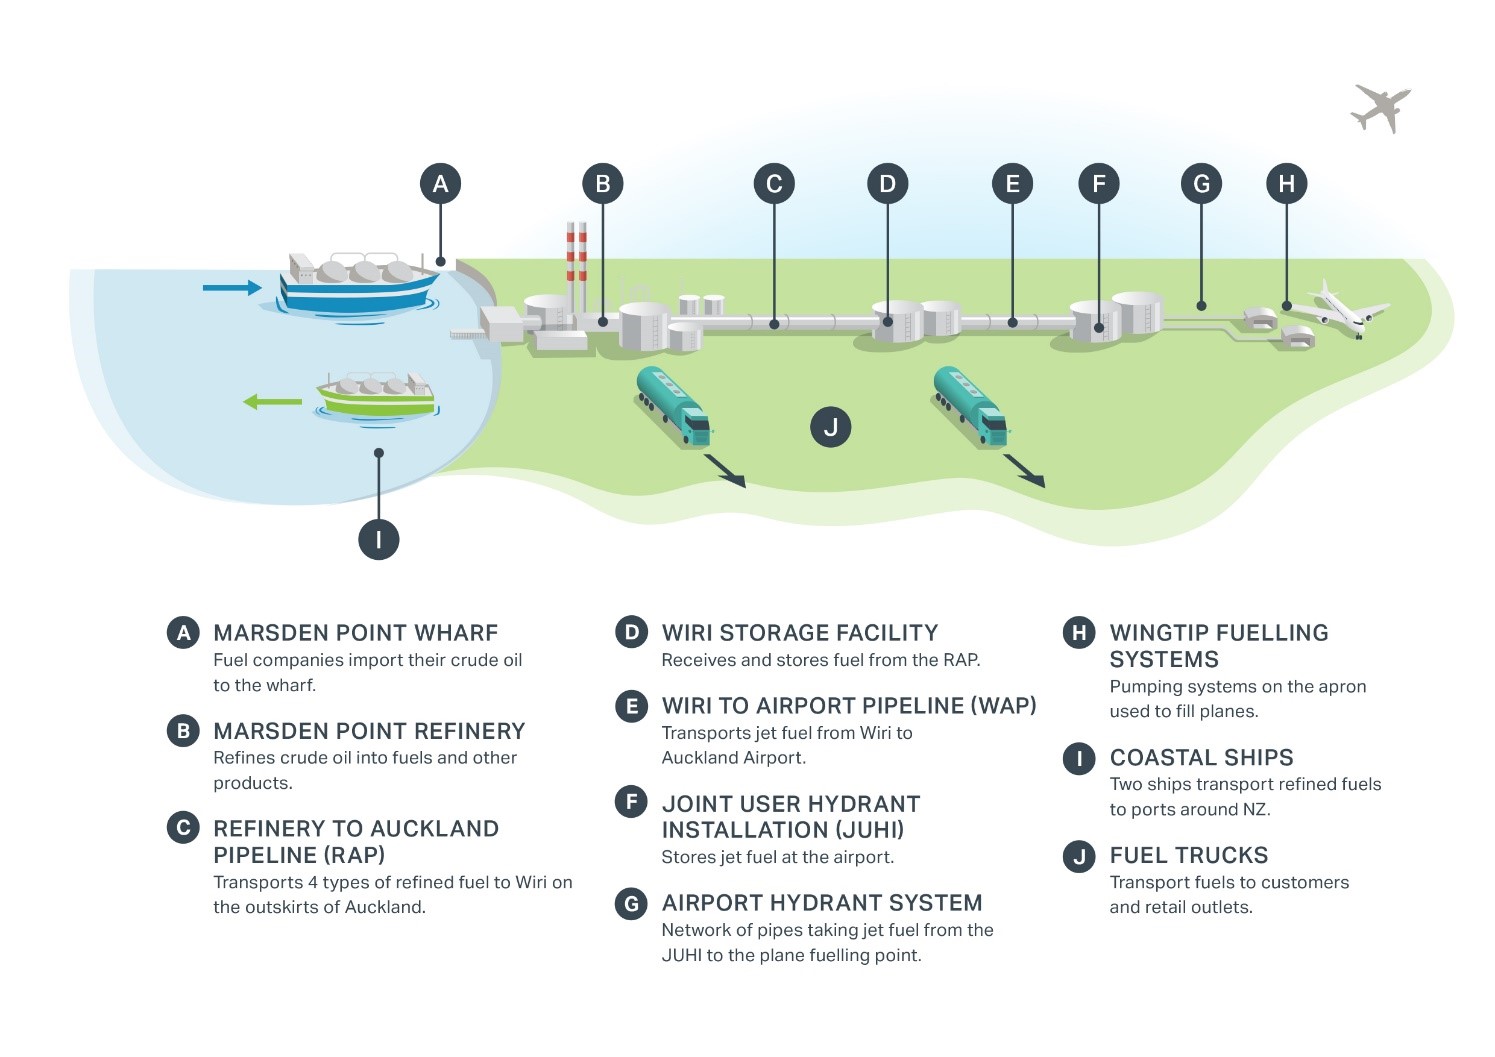 Diagram showing the fuel supply chain for Auckland Airport, crude oil being imported by ship through to being pumped to a plane: a) Marsden Point wharf – Fuel companies import the crude oil to the wharf b) Marsden Point refinery – Refines crude oil into fuels and other products c) Refinery to Auckland pipeline (RAP) – Transports 4 types of refined fuel to Wiri on the outskirts of Auckland d) Wiri storage facility – Receives and stores fuel from RAP e) Wiri to Airport pipeline (WAP) – Transports jet fuel from Wiri to Auckland Airport f) Joint user hydrant installation (JUHI) – Stores jet fuel at the airport g) Airport hydrant system – Network of pipes taking jet fuel from the JUHI to the plane fuelling point h) Wingtip fuelling systems – Pumping systems on the apron used to fill planes i) Coastal ships – Two ships transport refined fuels to ports around NZ j) Fuel trucks – Transport fuels to customers and retail outlets.